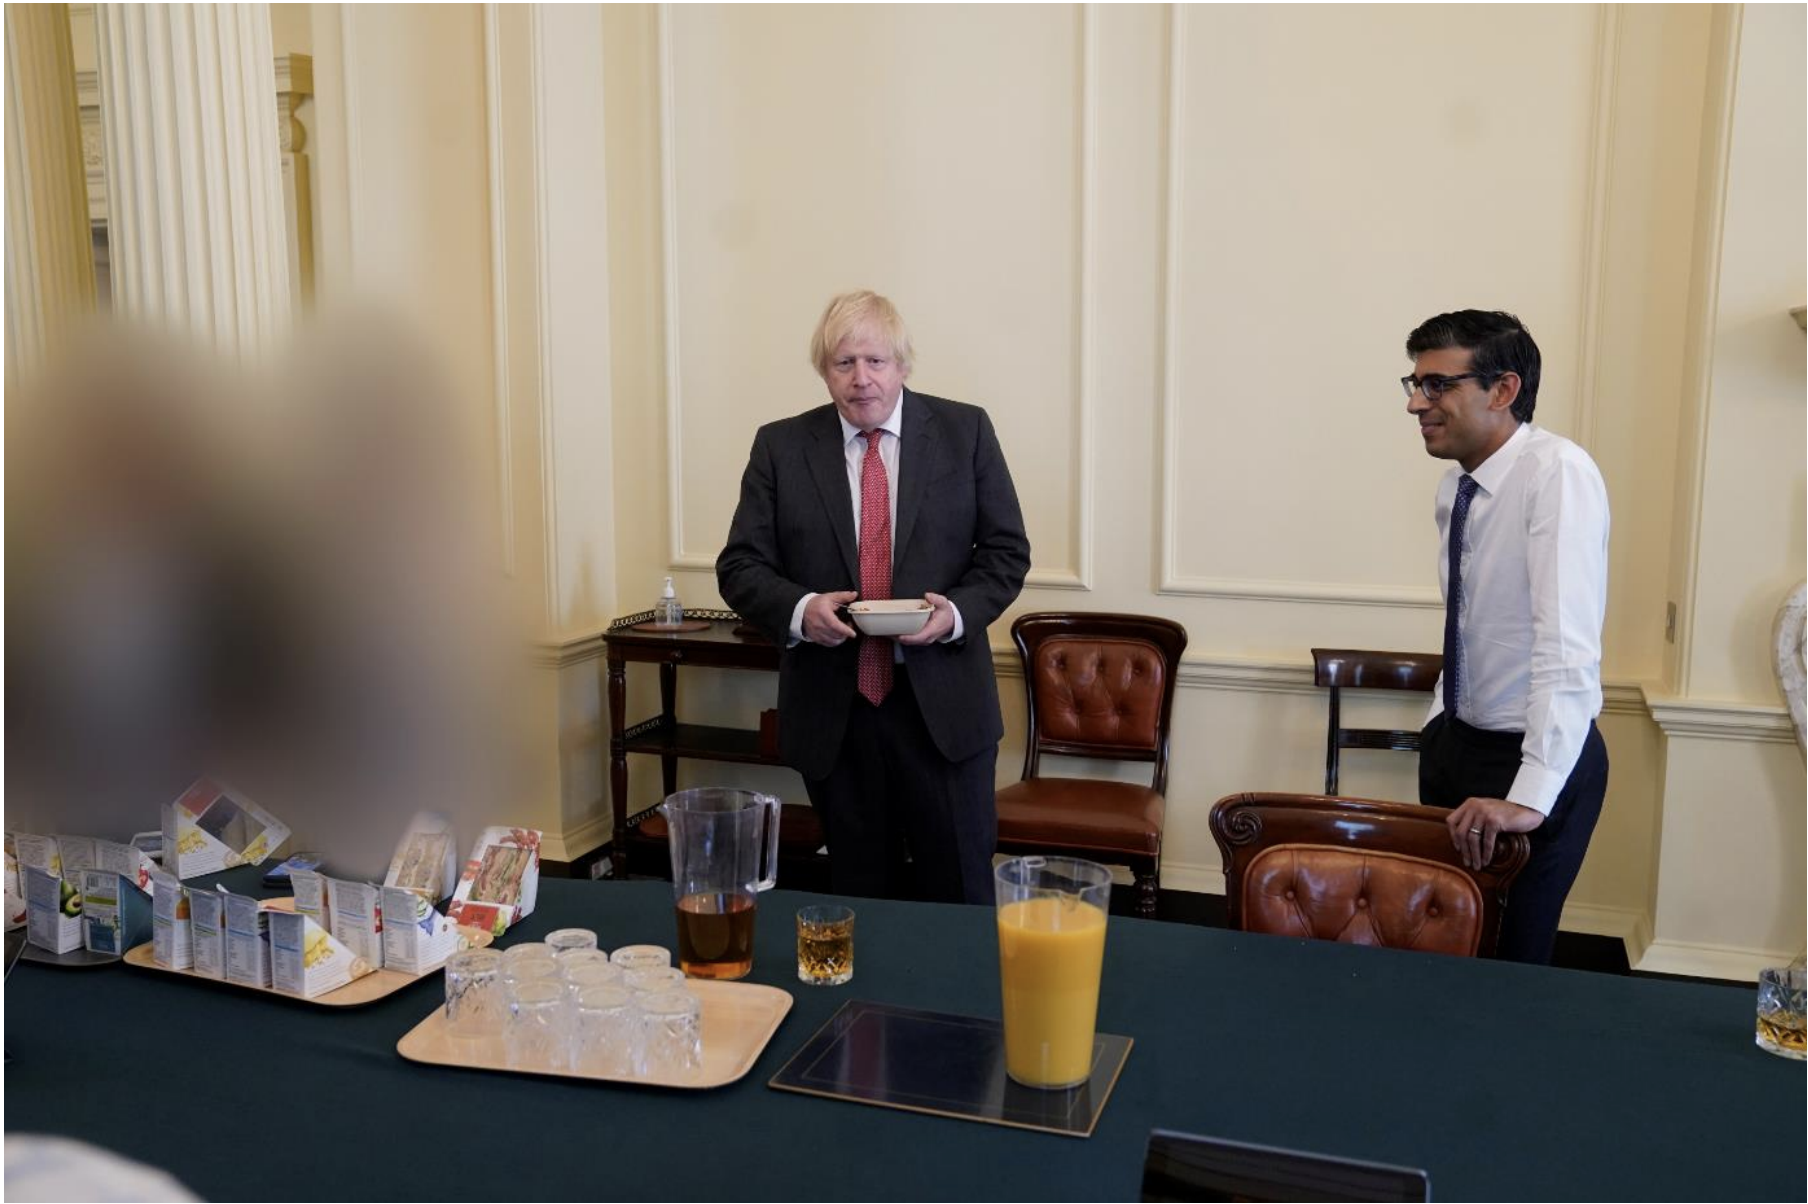 A gathering takes place in the Cabinet Room of Number 10 Downing Street on Prime Minister Boris Johnson's birthday. Rishi Sunak was also in attendance.